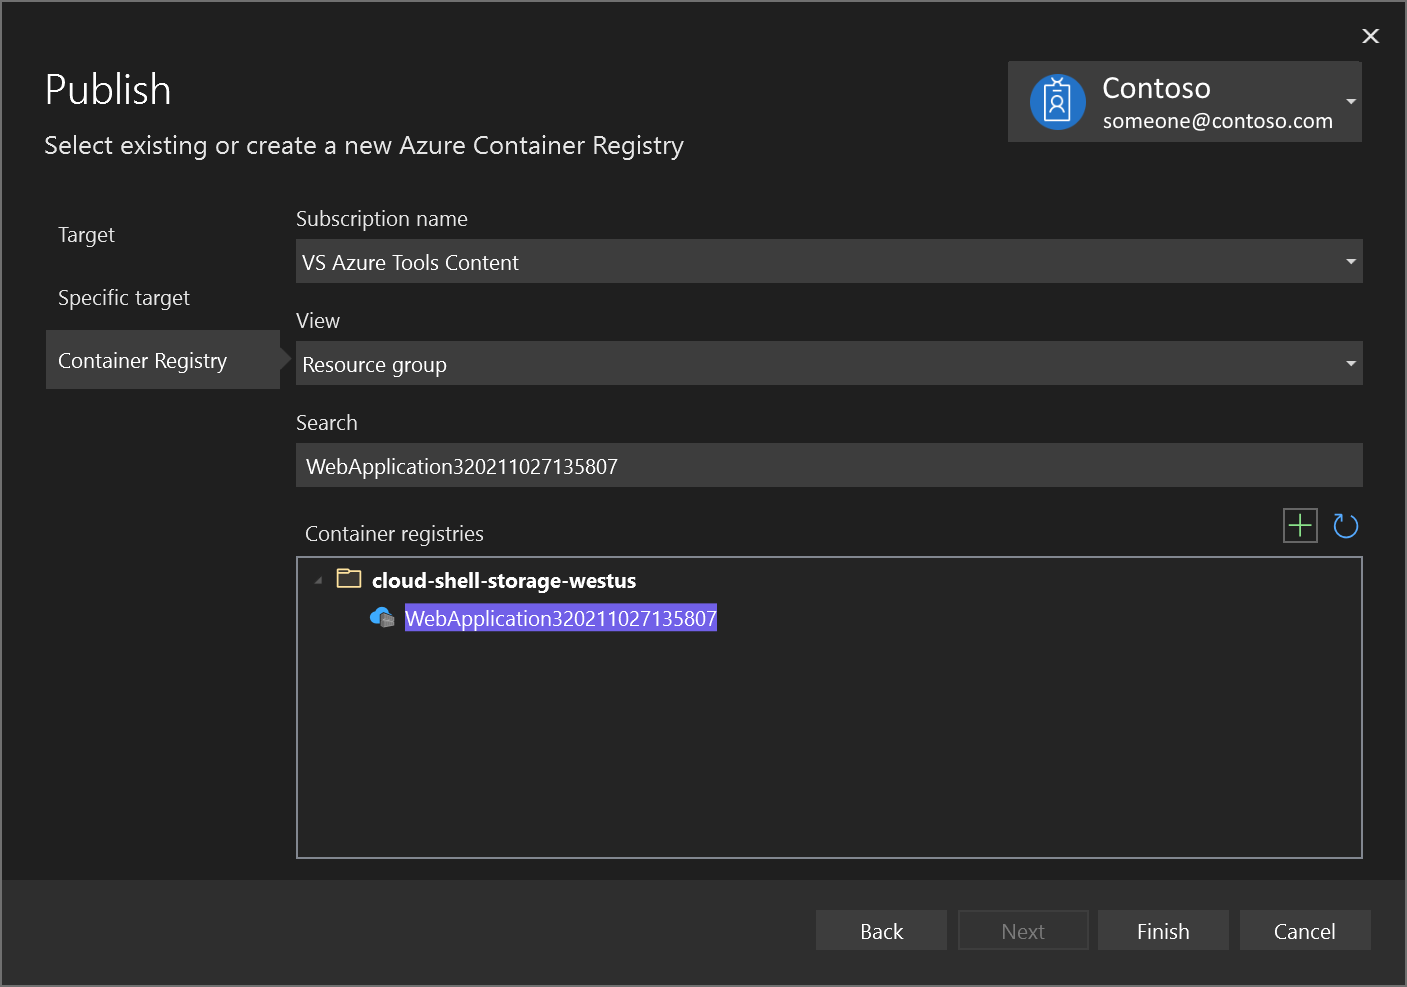 Screenshot of Publish dialog showing Azure Container Registry created.